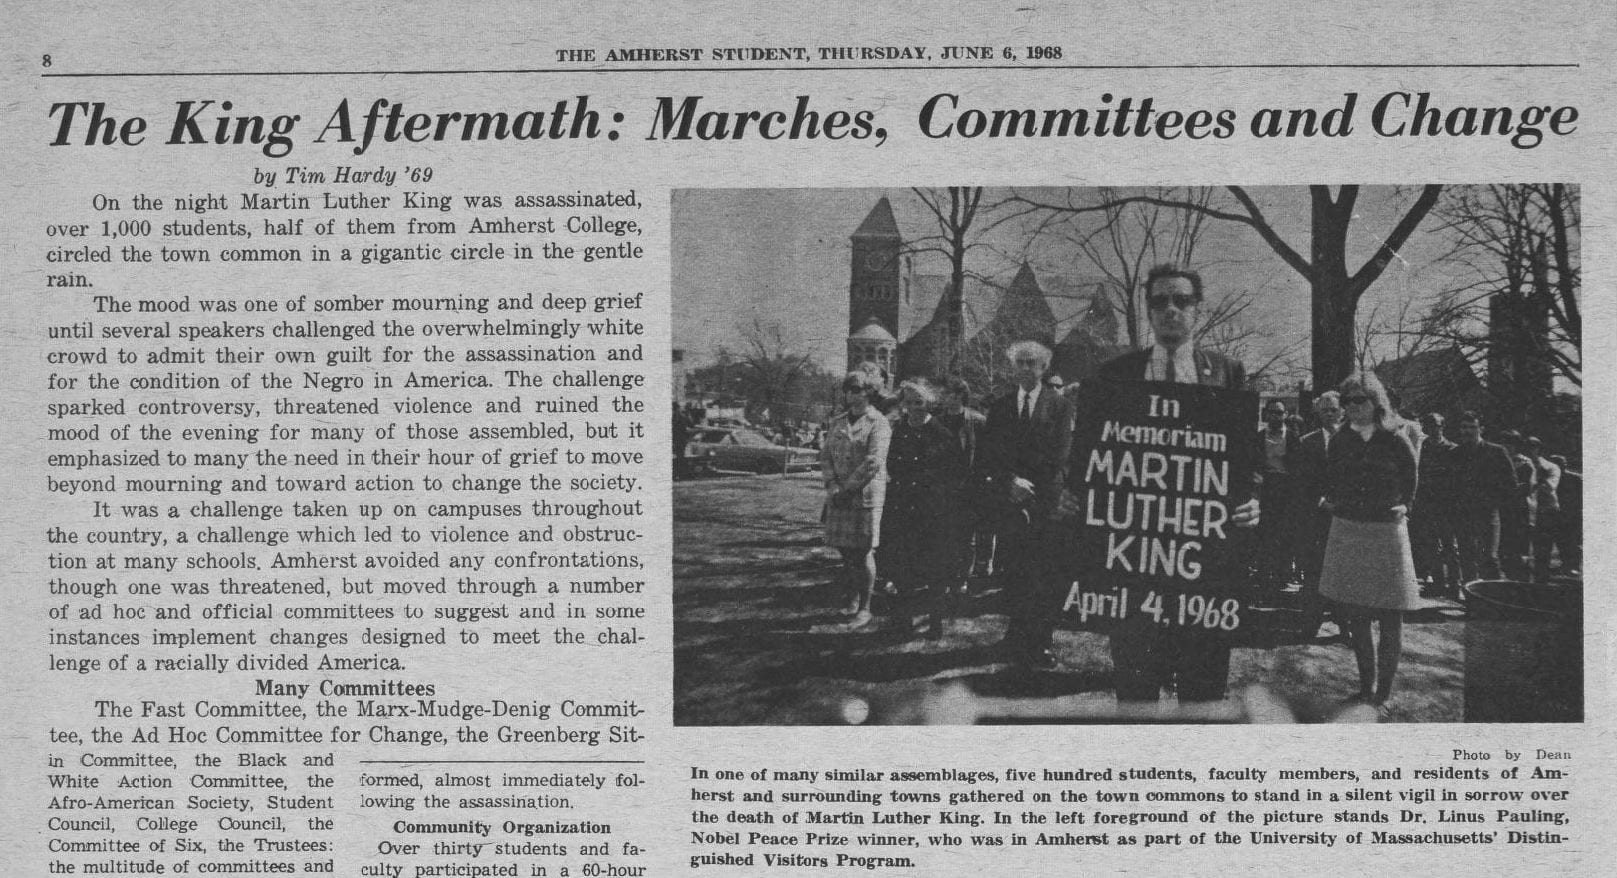 Partial view of a page of the Amherst Student newspaper from June 6, 1968, featuring the headline "The King Aftermath: Marches, Committees and Change"